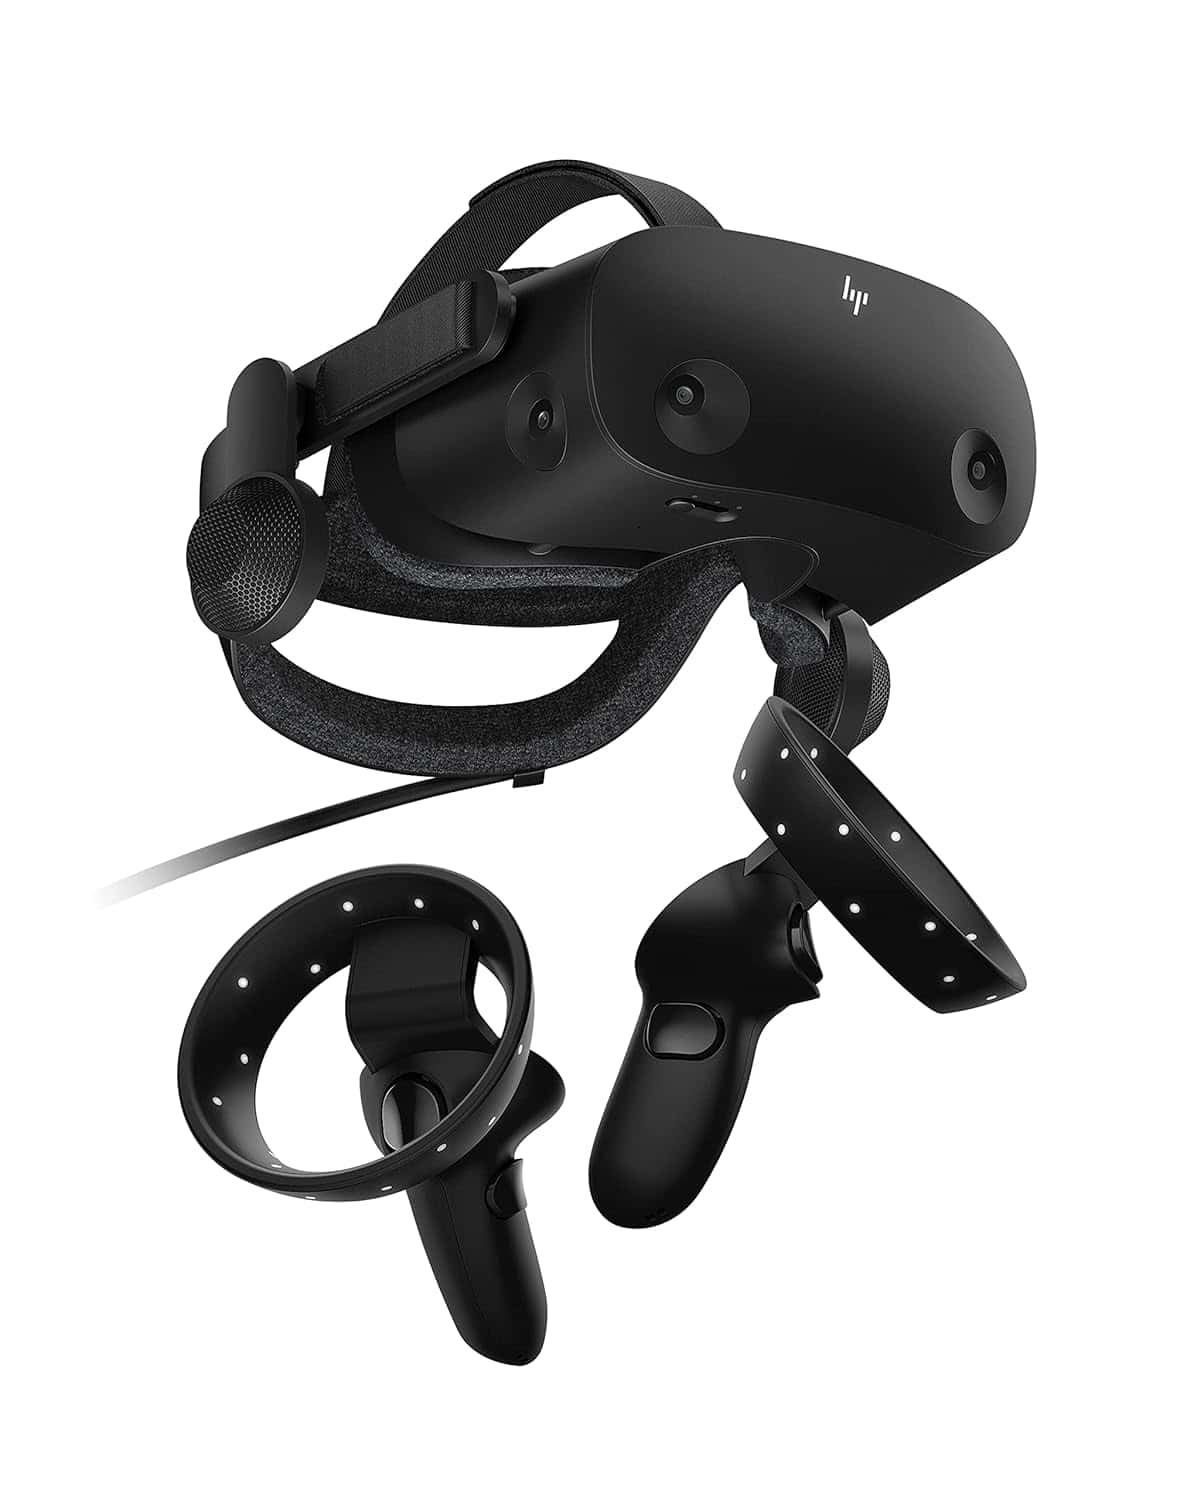 HP Reverb G2: A cutting-edge VR headset with an attached controller.